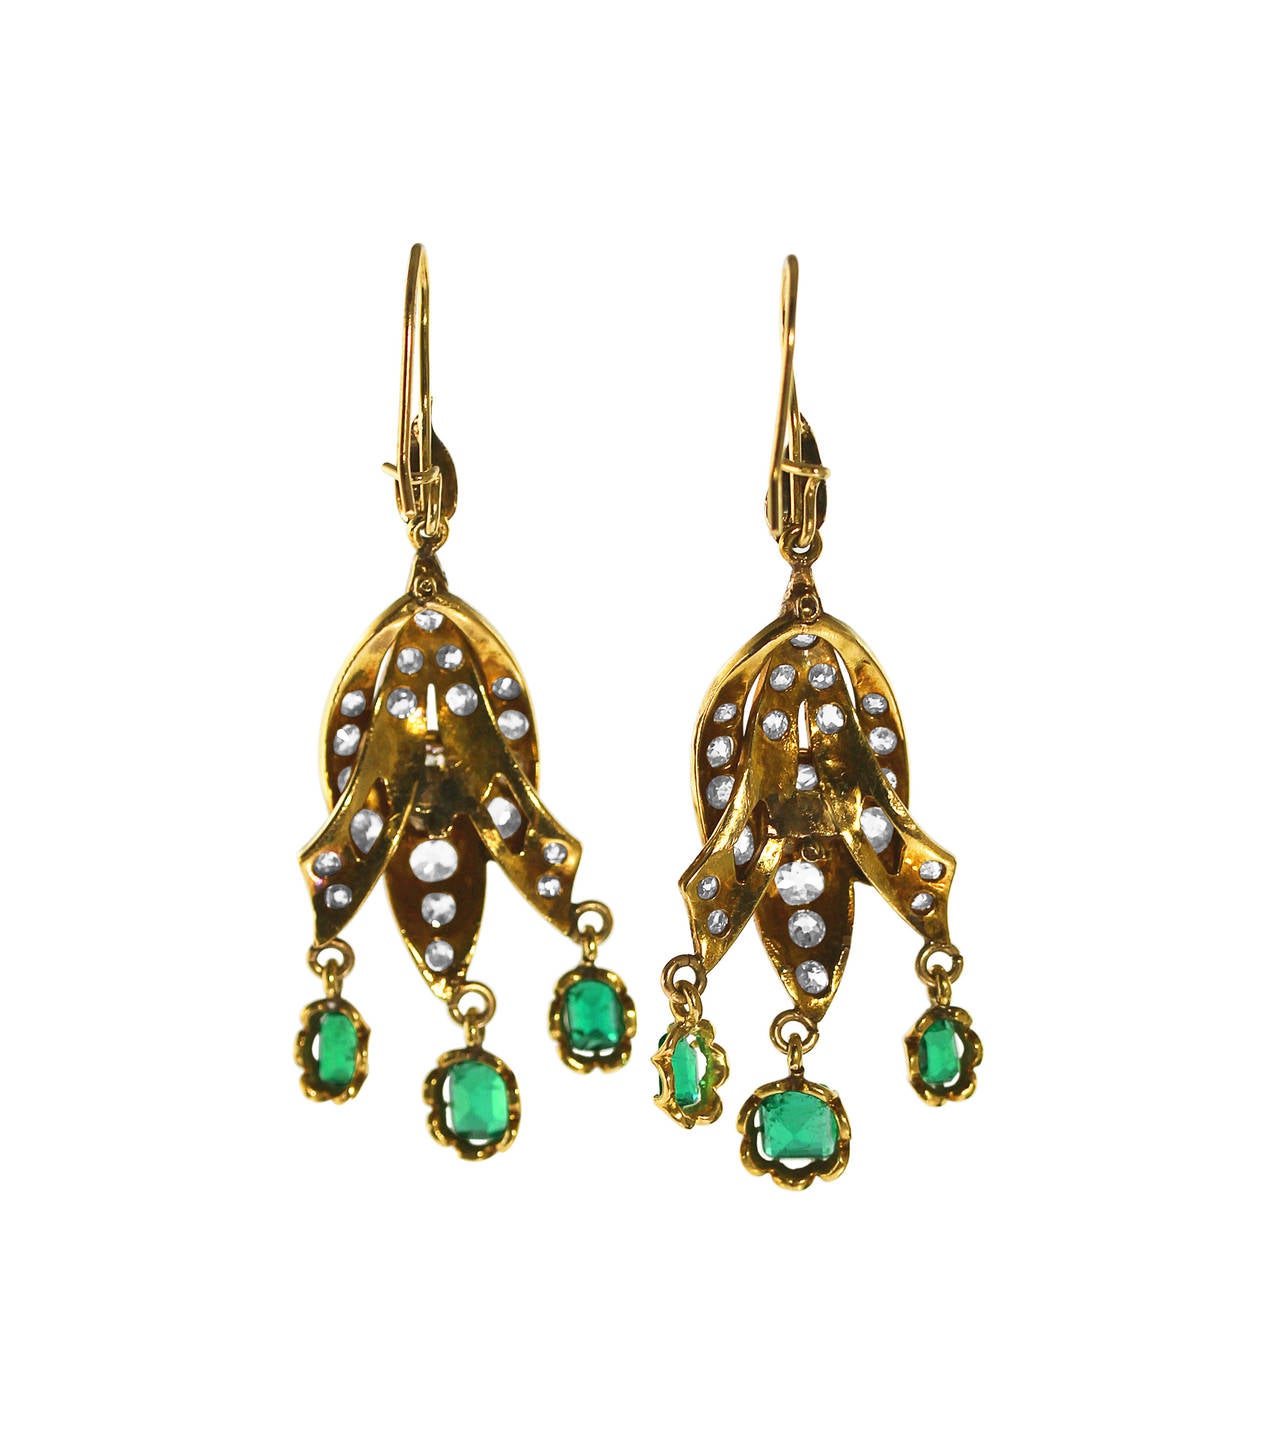 A pair of antique 14 karat yellow gold, emerald and diamond pendant earrings, designed ornate gold plaques set with 44 old mine-cut diamonds weighing approximately 1.80 carats, supporting articulated pendants set with 6 emerald-cut emeralds weighing